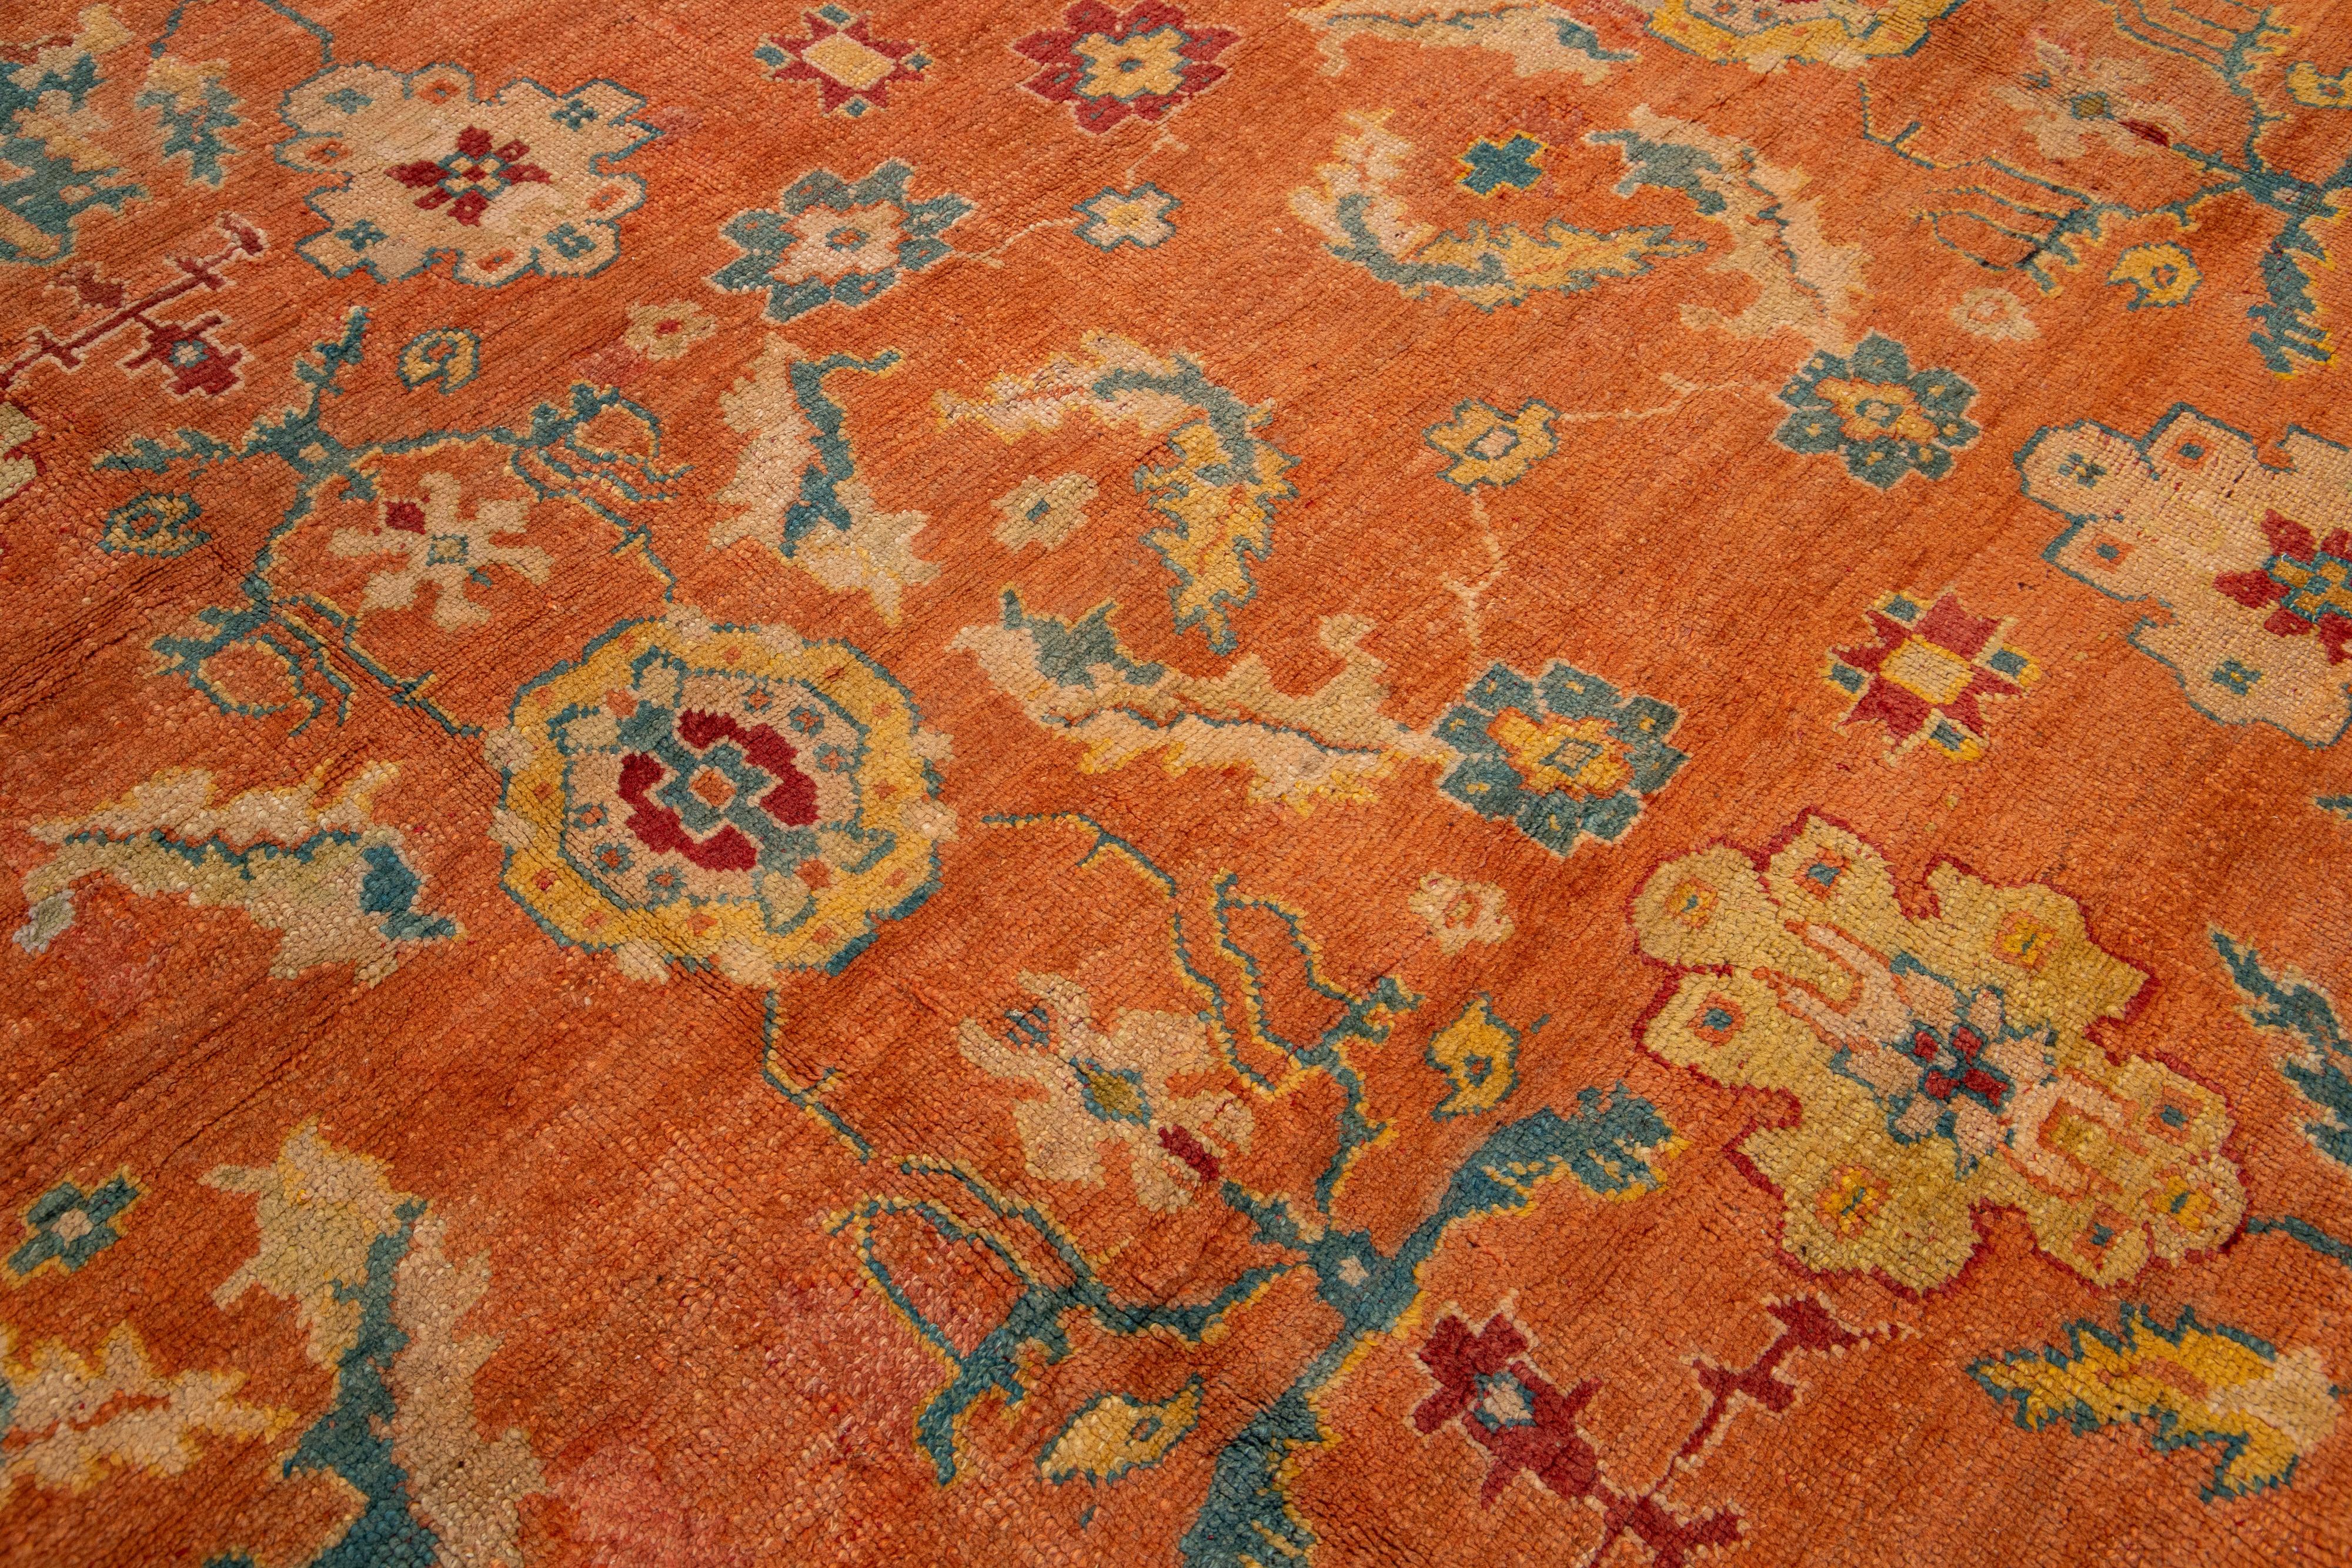 Orange and Blue Antique Turkish Oushak Wool Rug Handmade From the 1880s For Sale 2